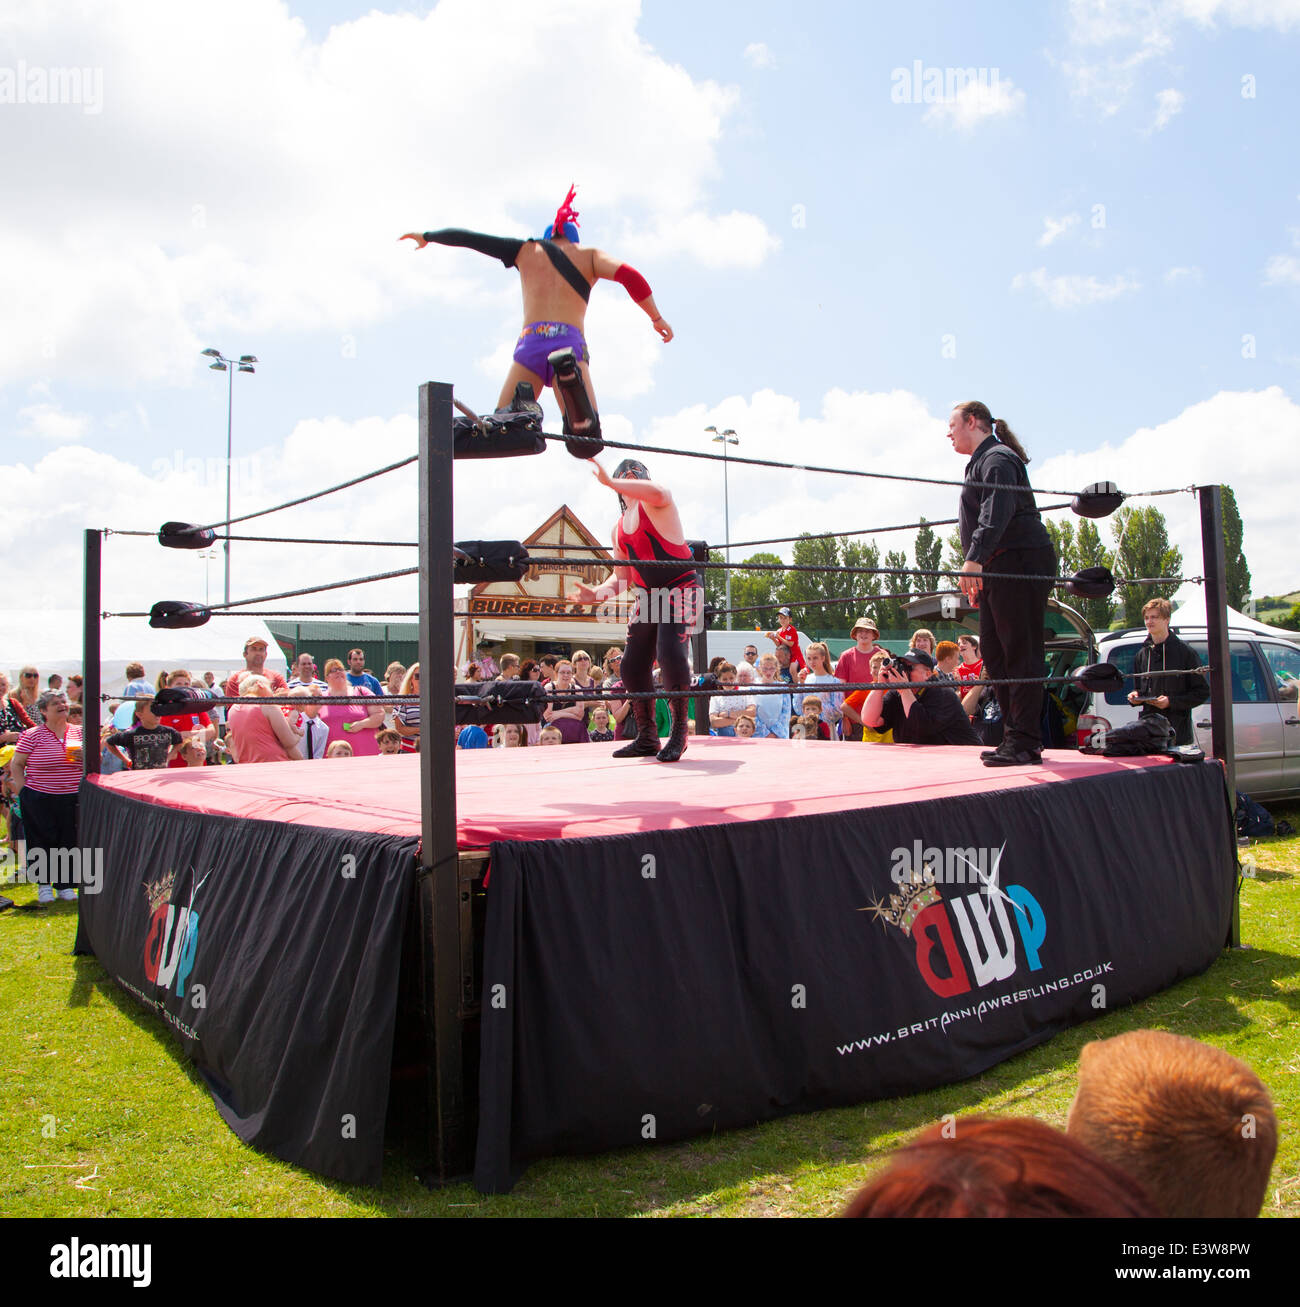 A wrestler wearing a mask leaping off the ropes onto his opponent watched by a crowd at Denbigh town summer carnival Stock Photo